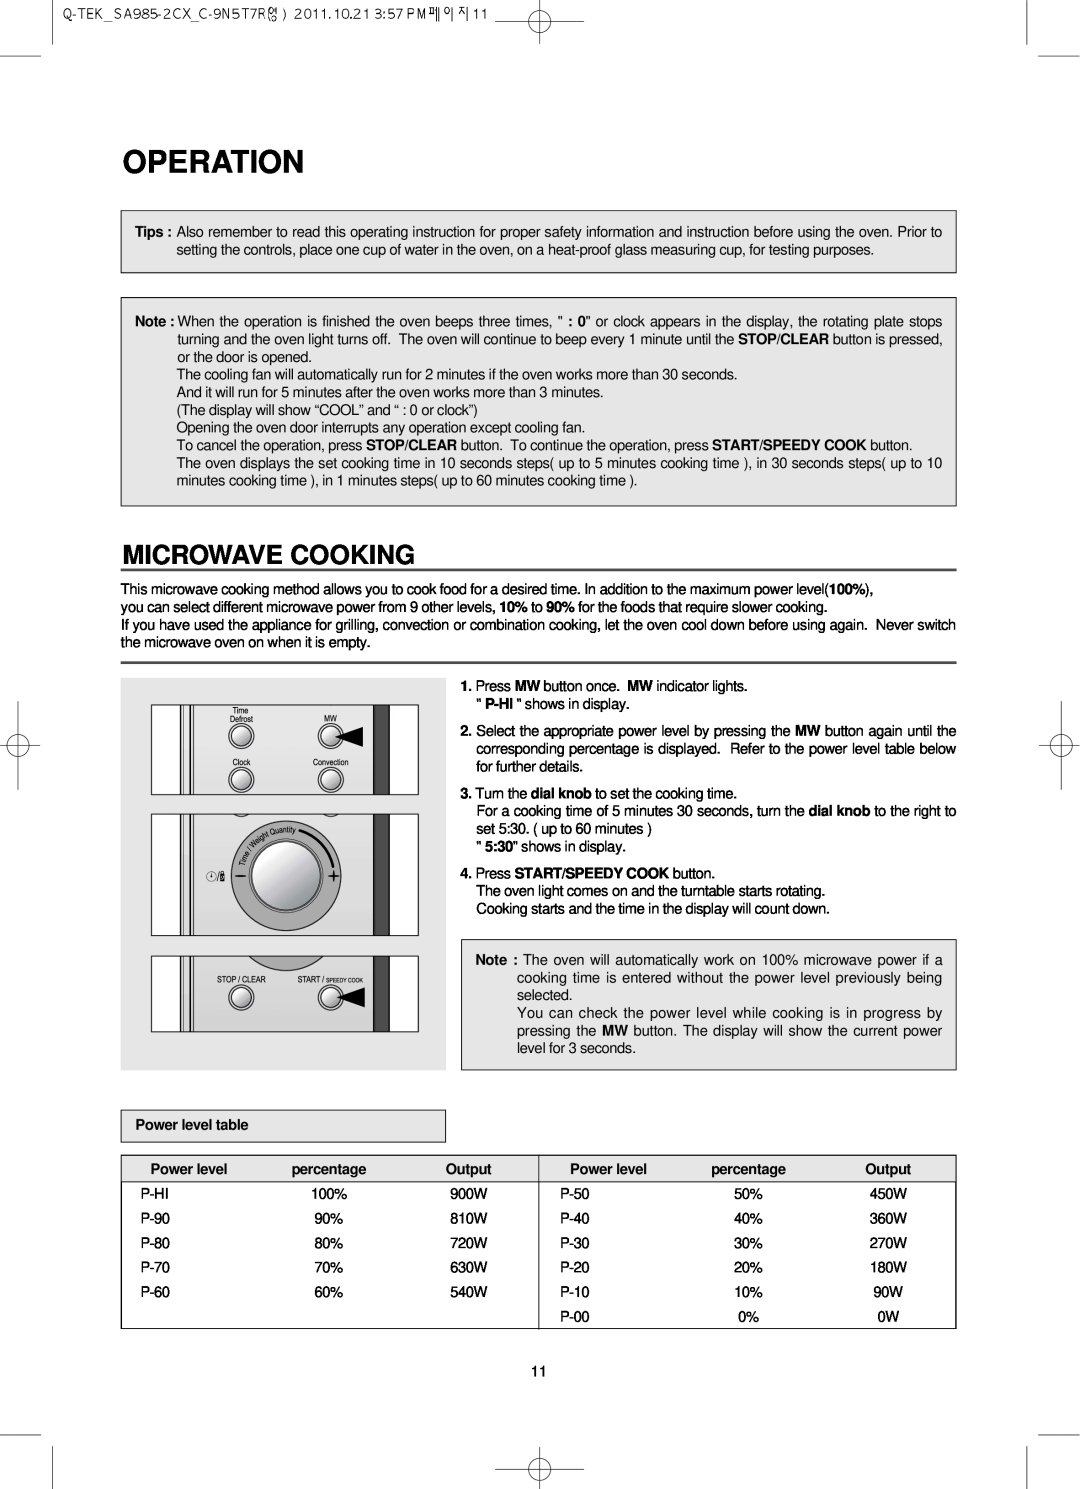 Smeg Microwave Convection/Grill Oven, SA985-2CX owner manual Operation, Microwave Cooking 